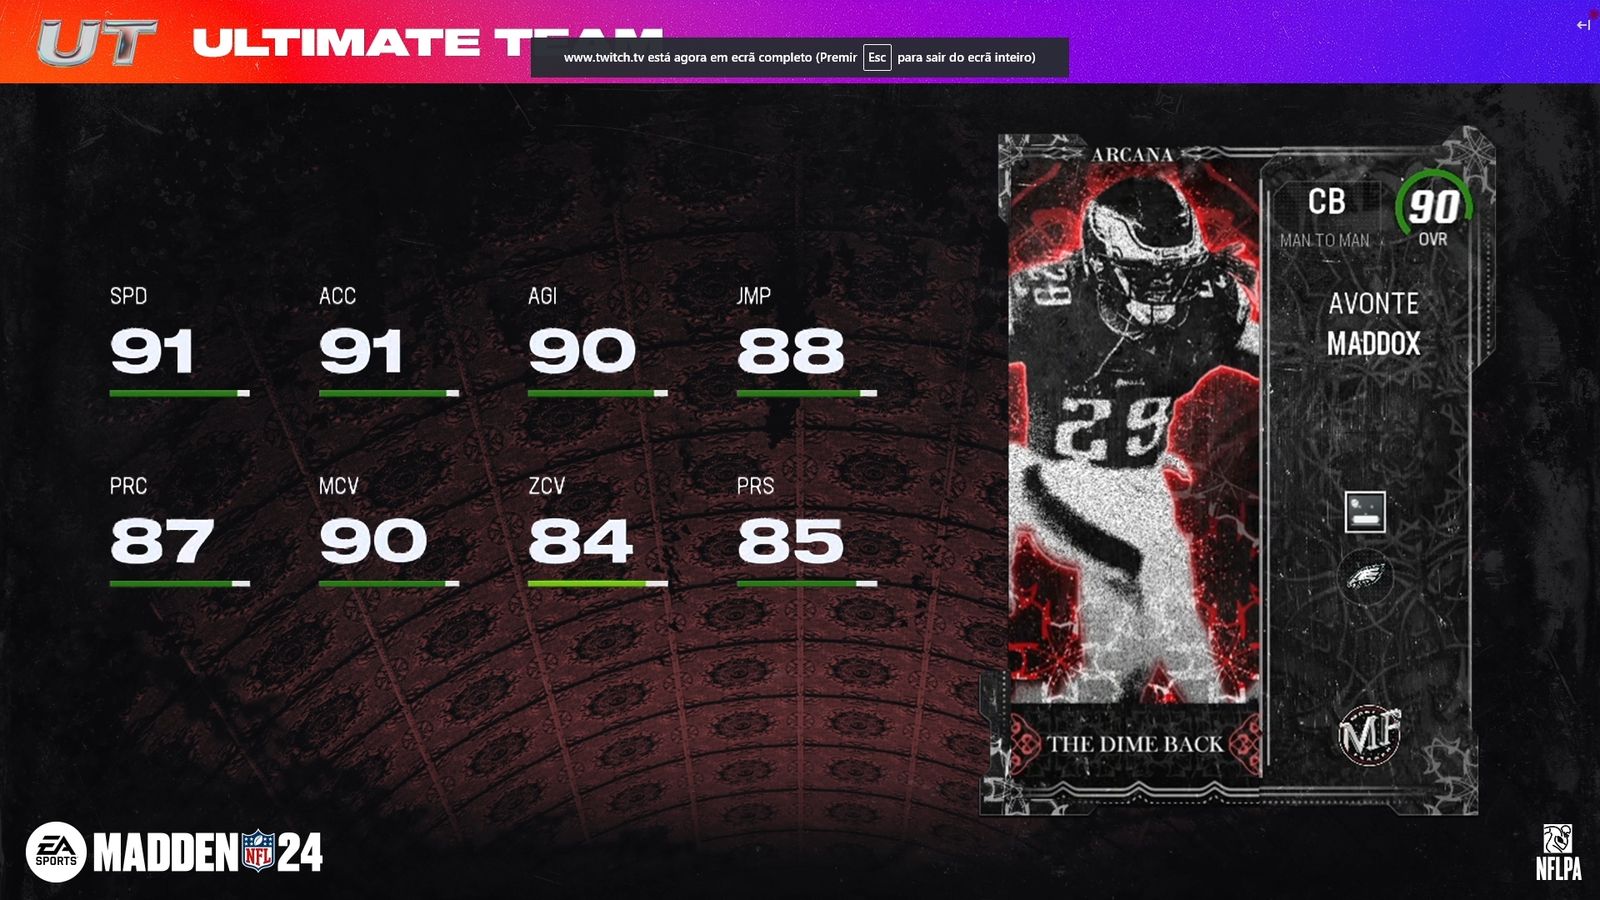 Madden 24 Most Feared Avonte Maddox card